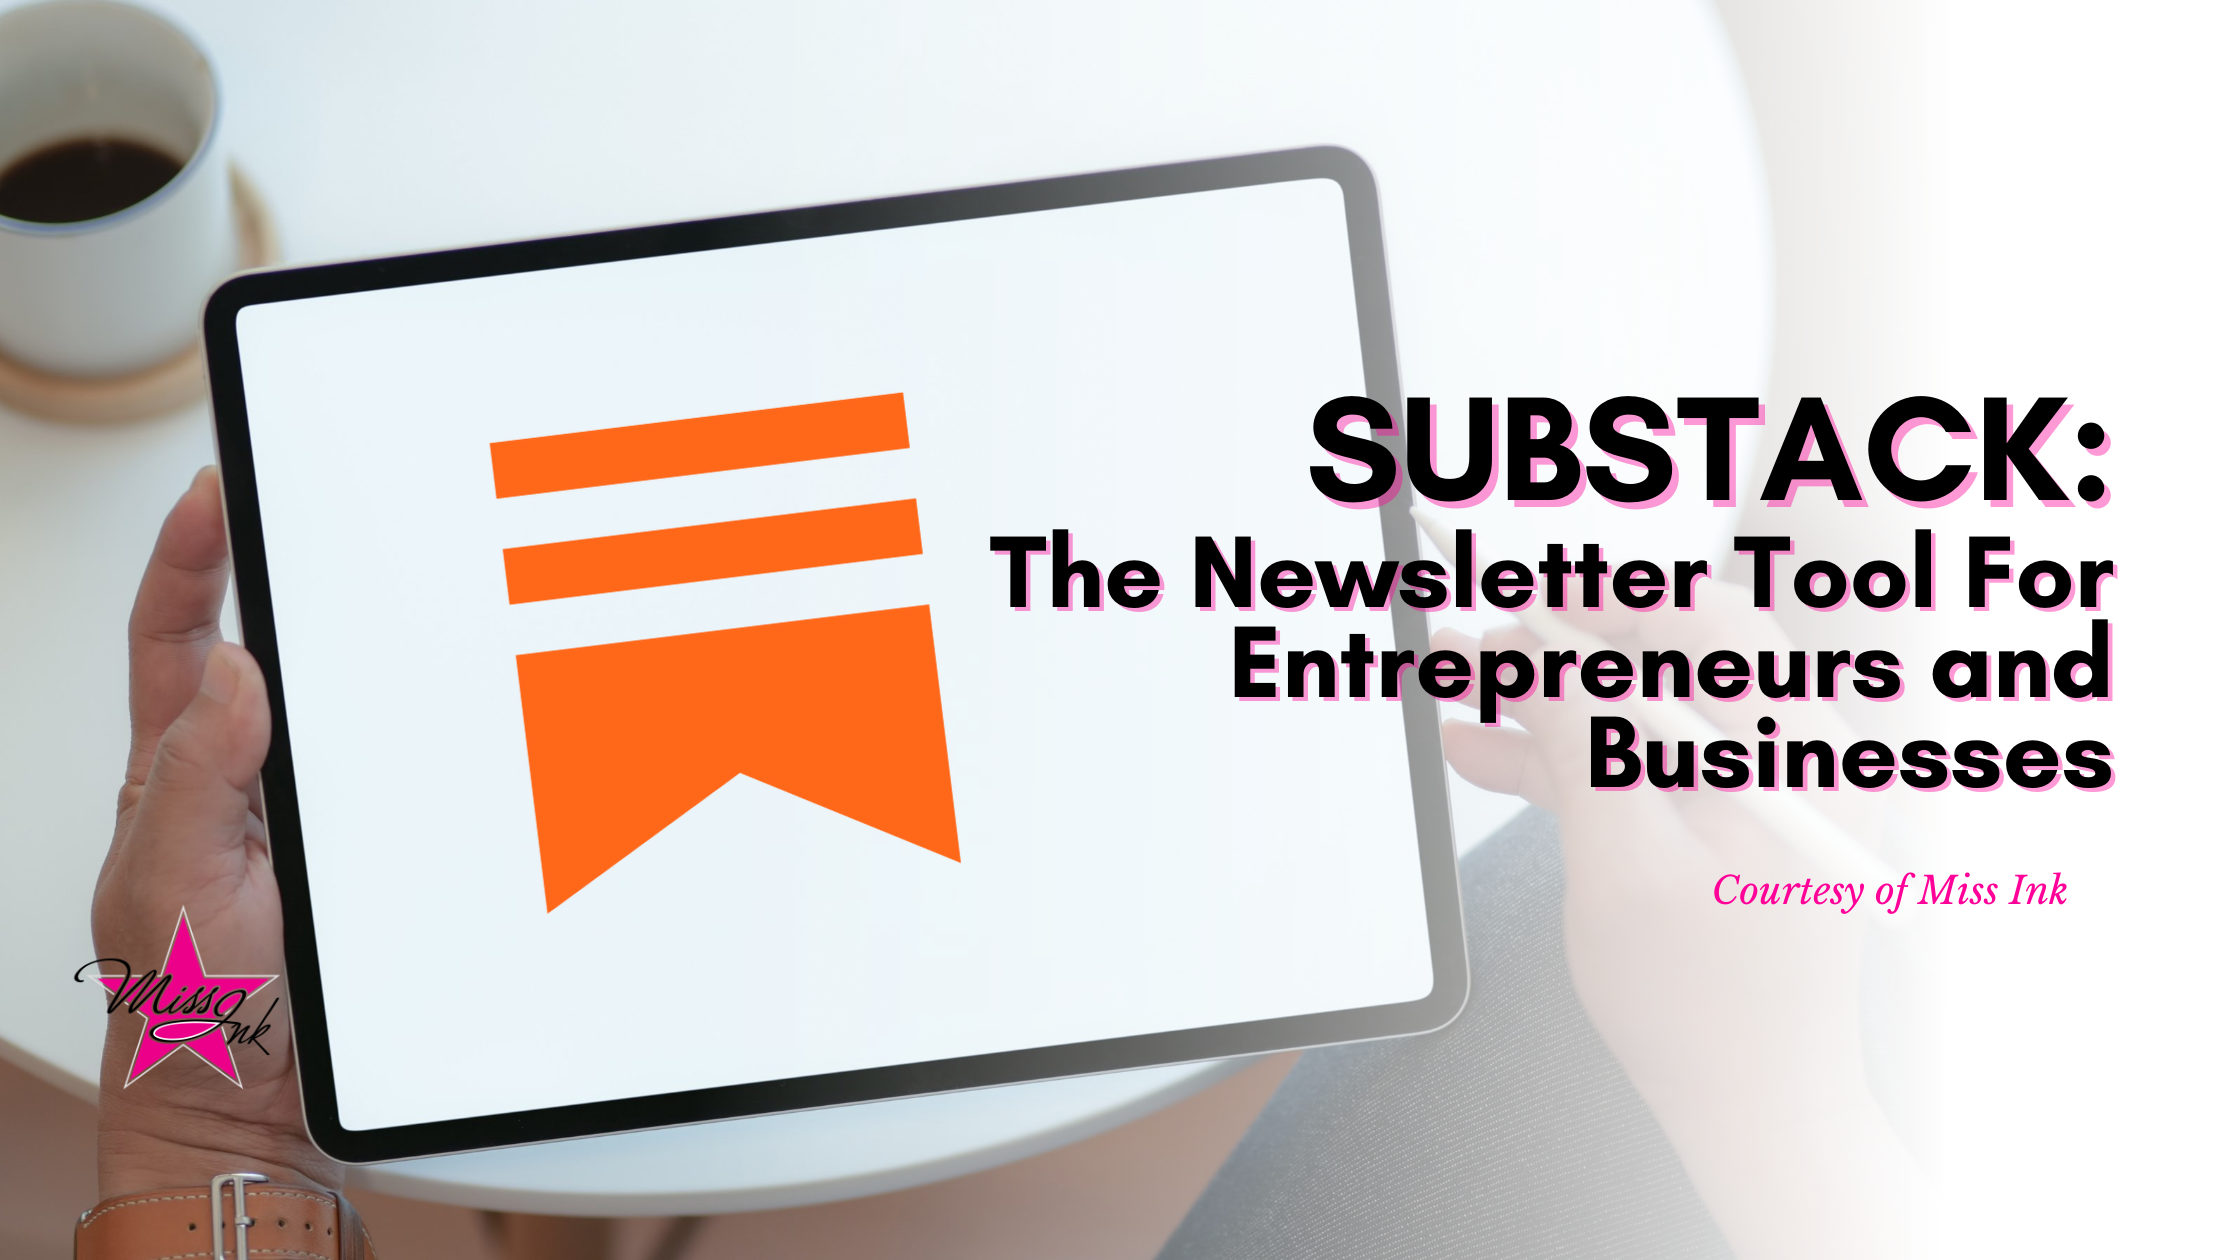 Substack: The Newsletter Tool For Entrepreneurs and Businesses. 